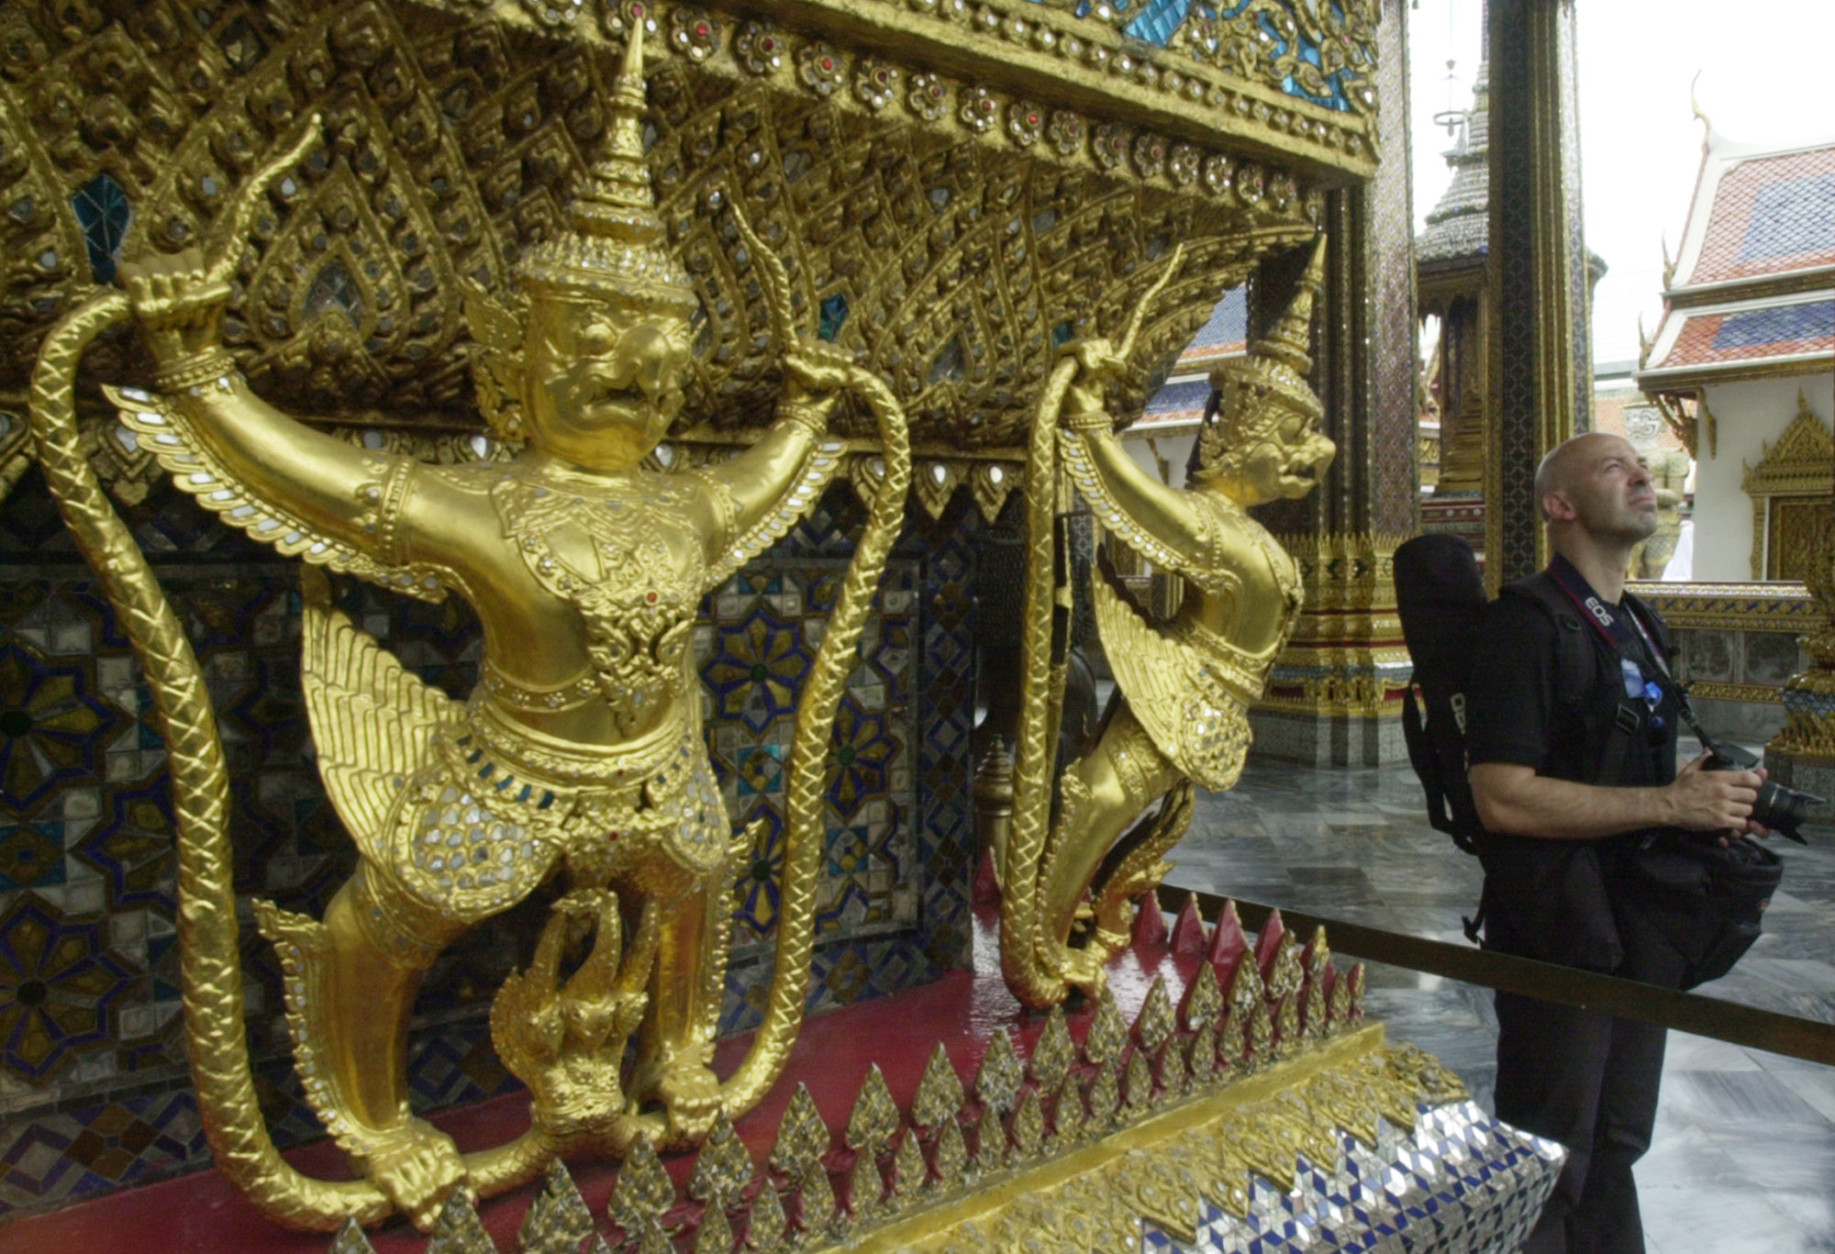 Marco Solas of Brisbane, Australia, tours Thailand's Grand Palace Wednesday, Aug. 4, 2004, in Bangkok.  Thai officials note that tourism is on the increase by more than 20 per cent over this time last year.  Tourism is one of top revenue producers for the Southeast Asia nation.  (AP Photo/Sakchai Lalit)